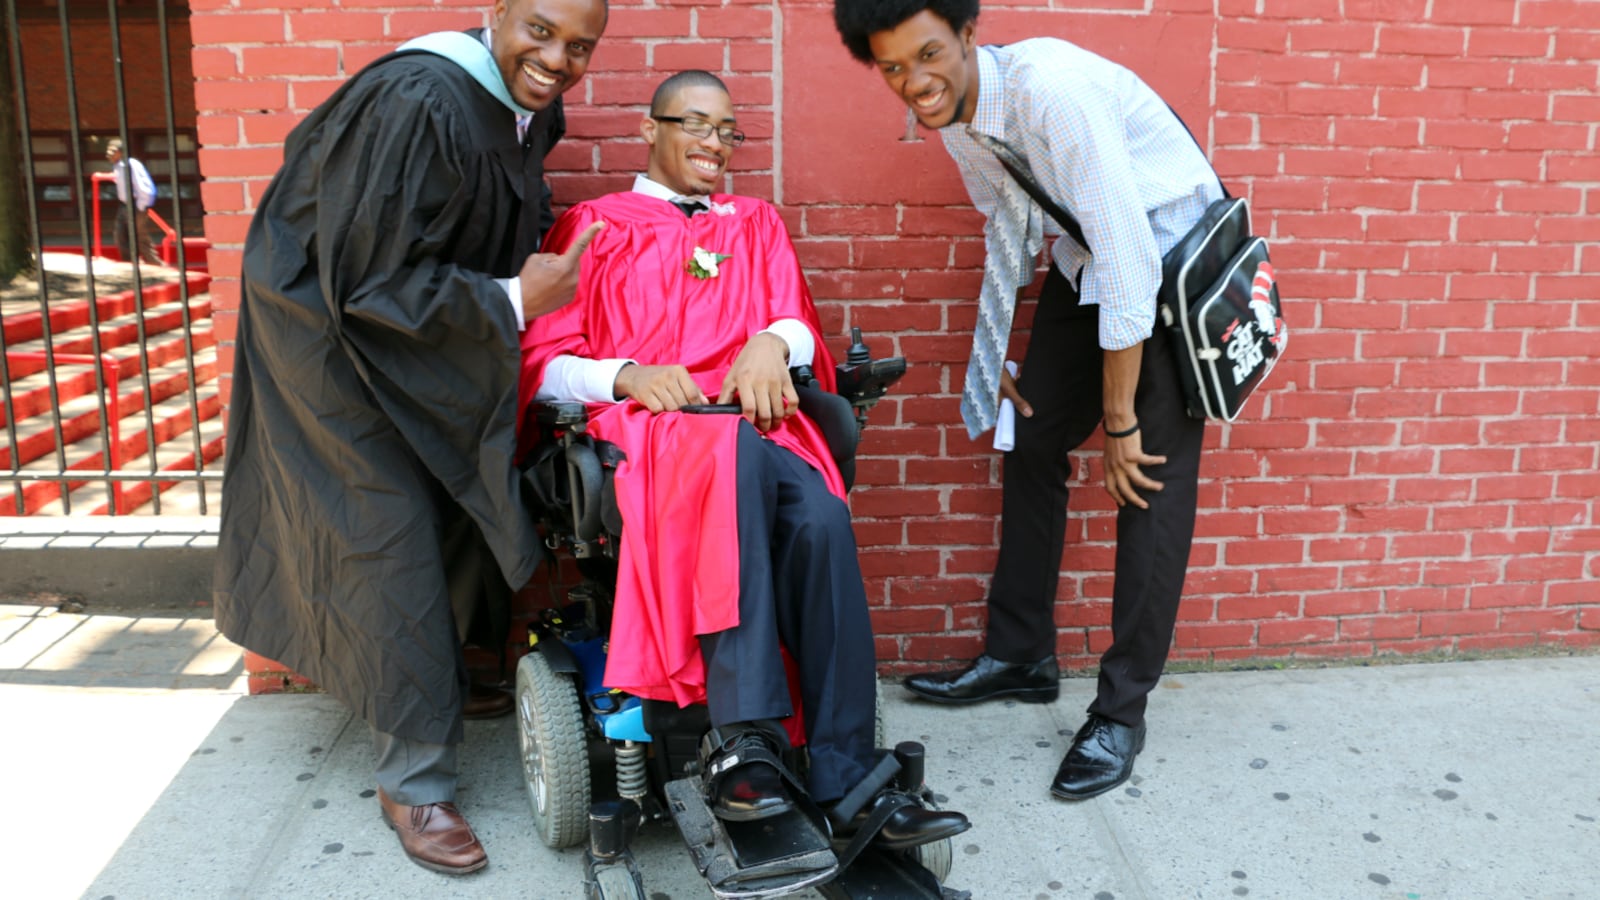 Three Boys and Girls graduates from different years: Math teacher Jamaal Harvey, class of 2016 graduate Tyjuan Felton, and paraprofessional Keith Robinson.